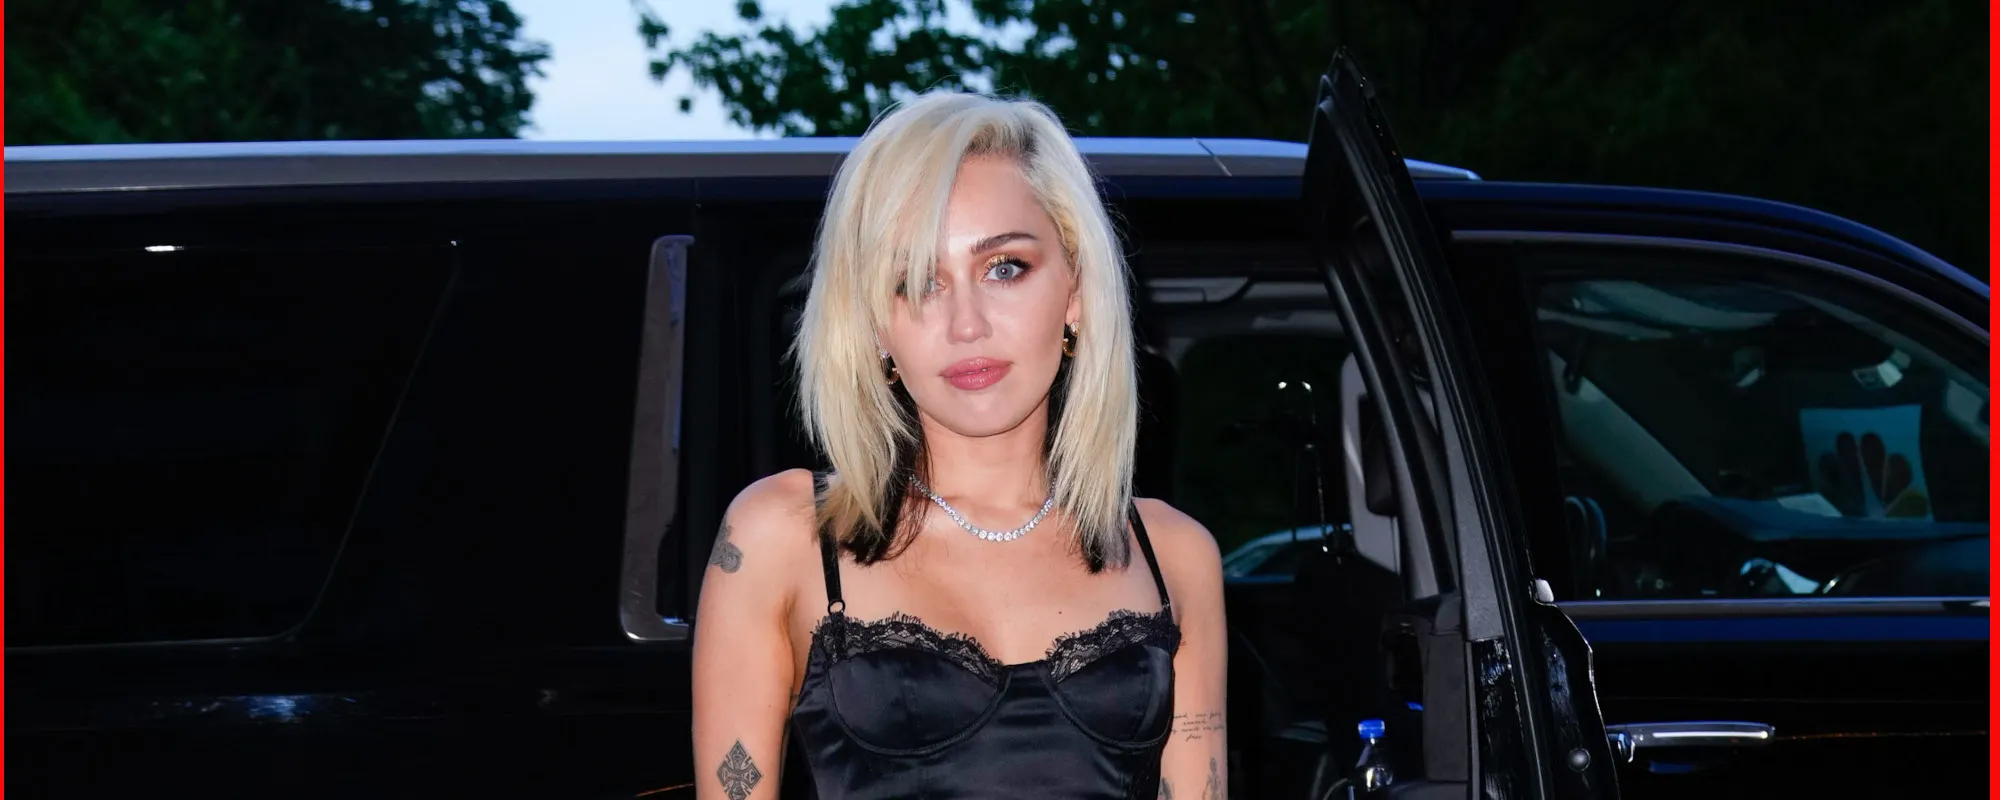 Miley Cyrus Comments on Sinéad O’Connor’s Criticism of “Wrecking Ball”